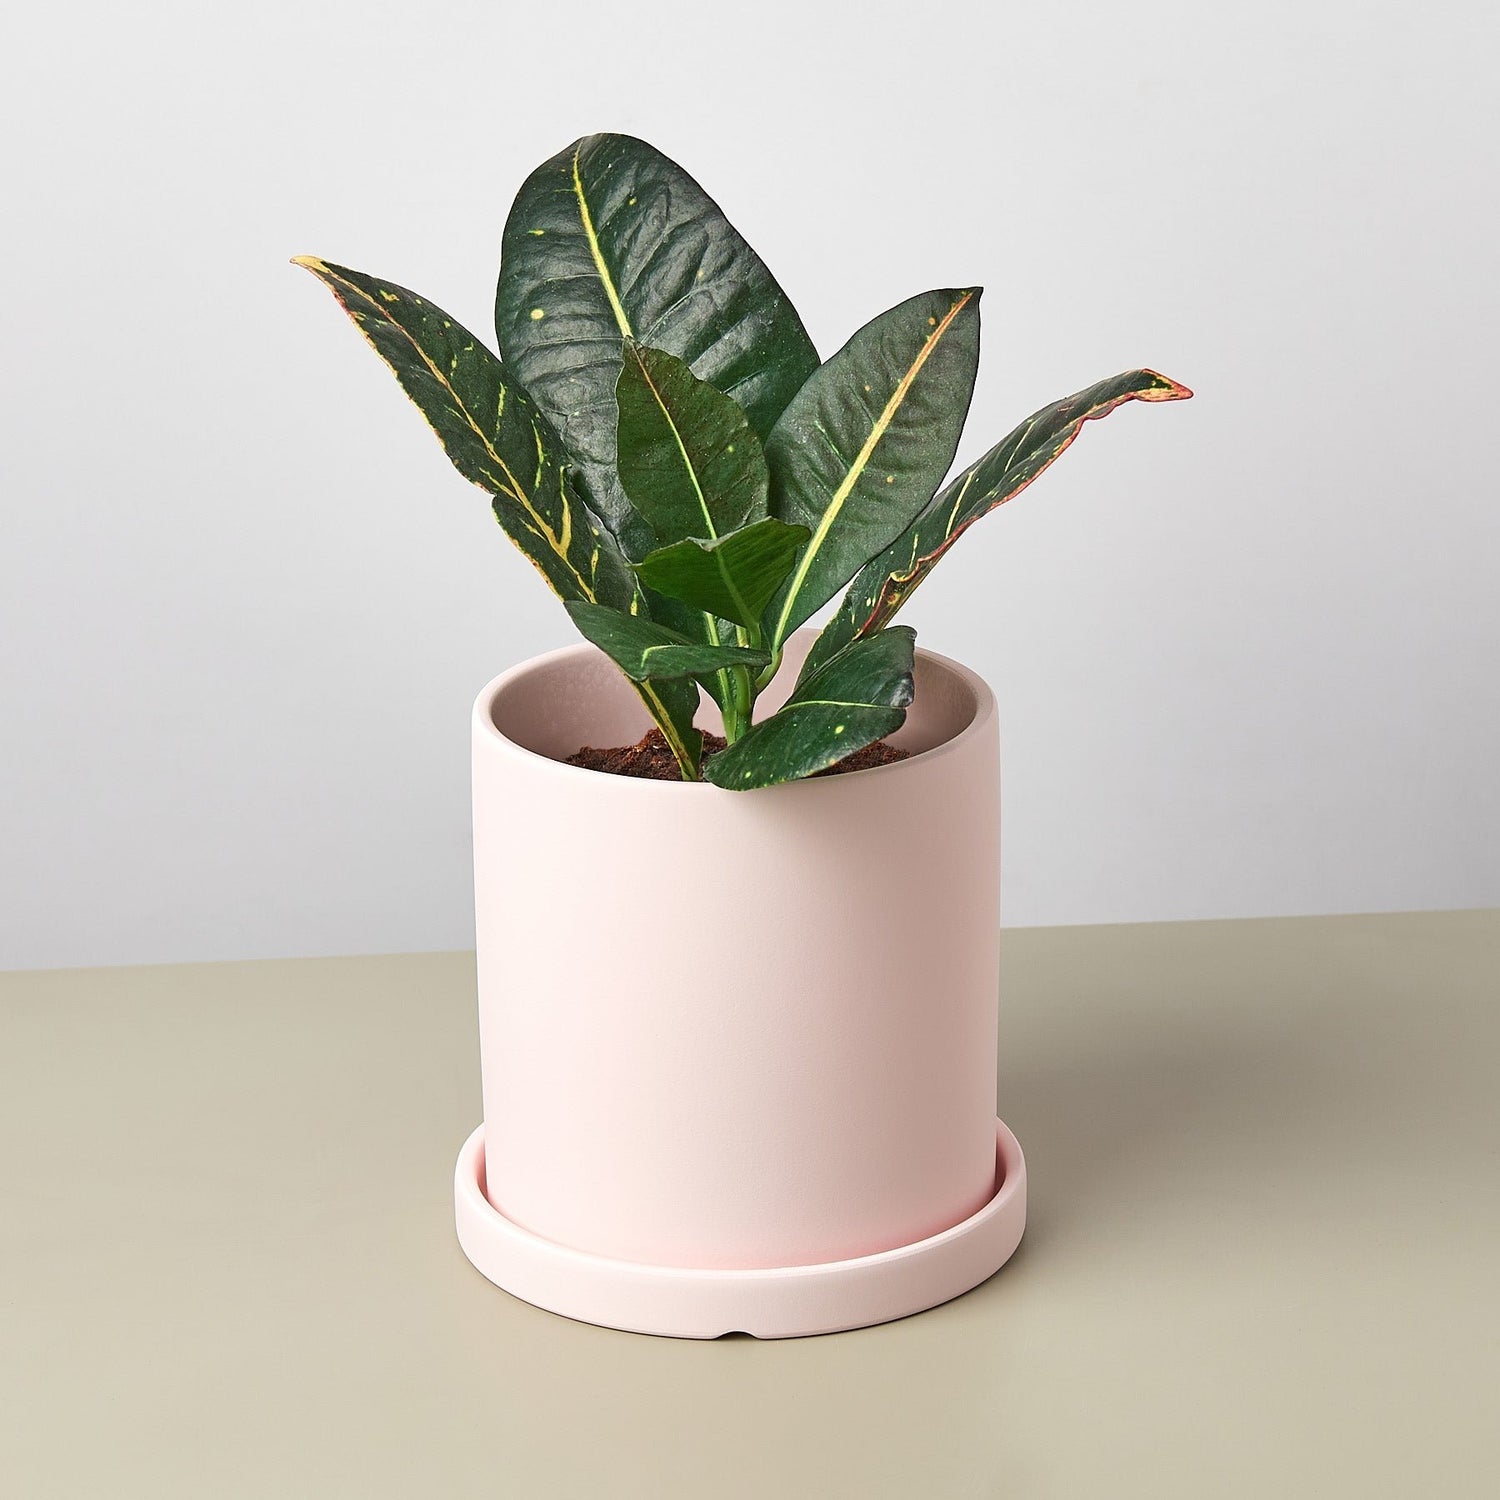 Matte Finish Cylinder Planter with Saucer - Ethereal Company